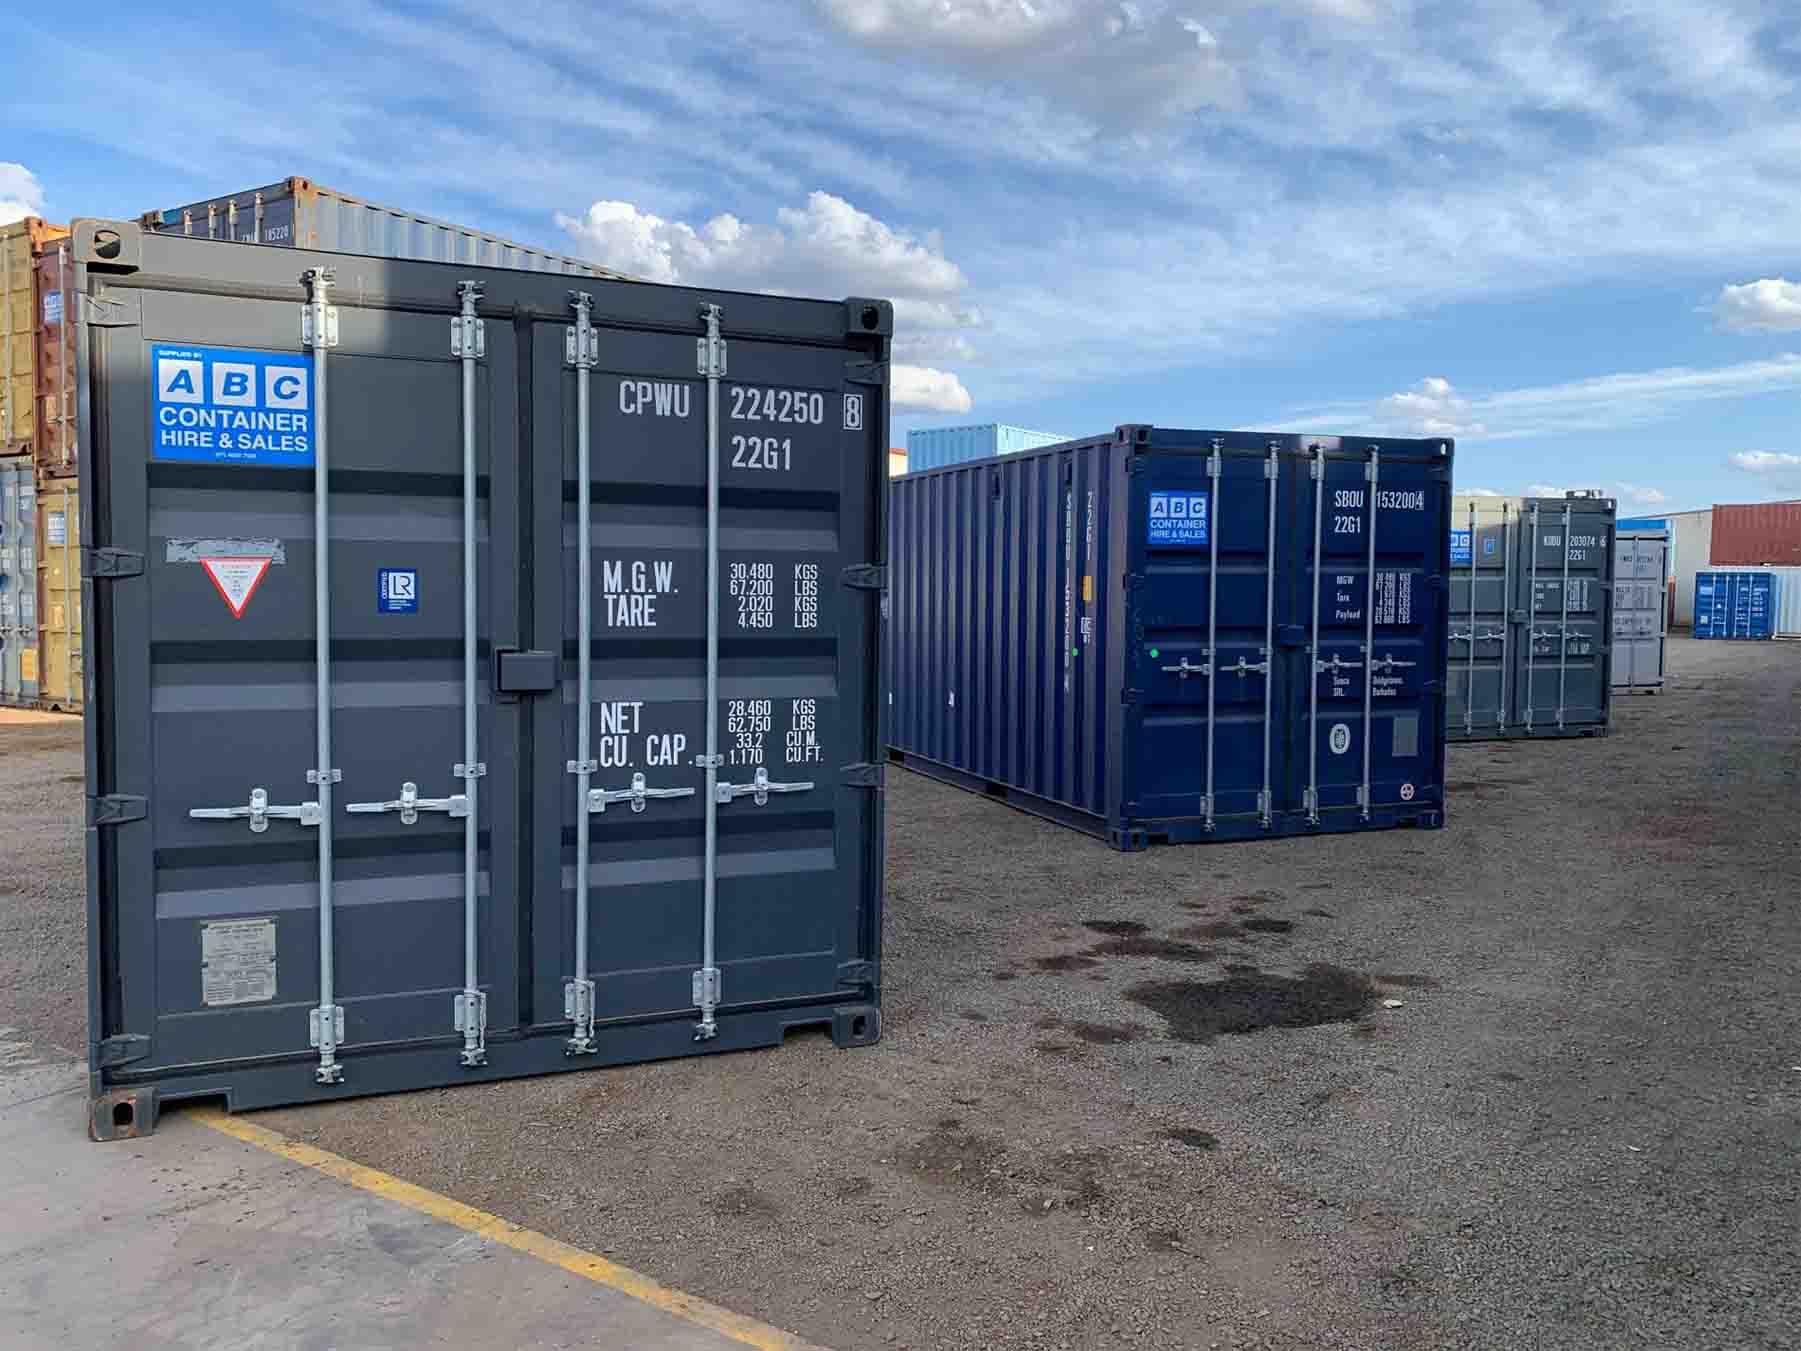 A group of shipping containers